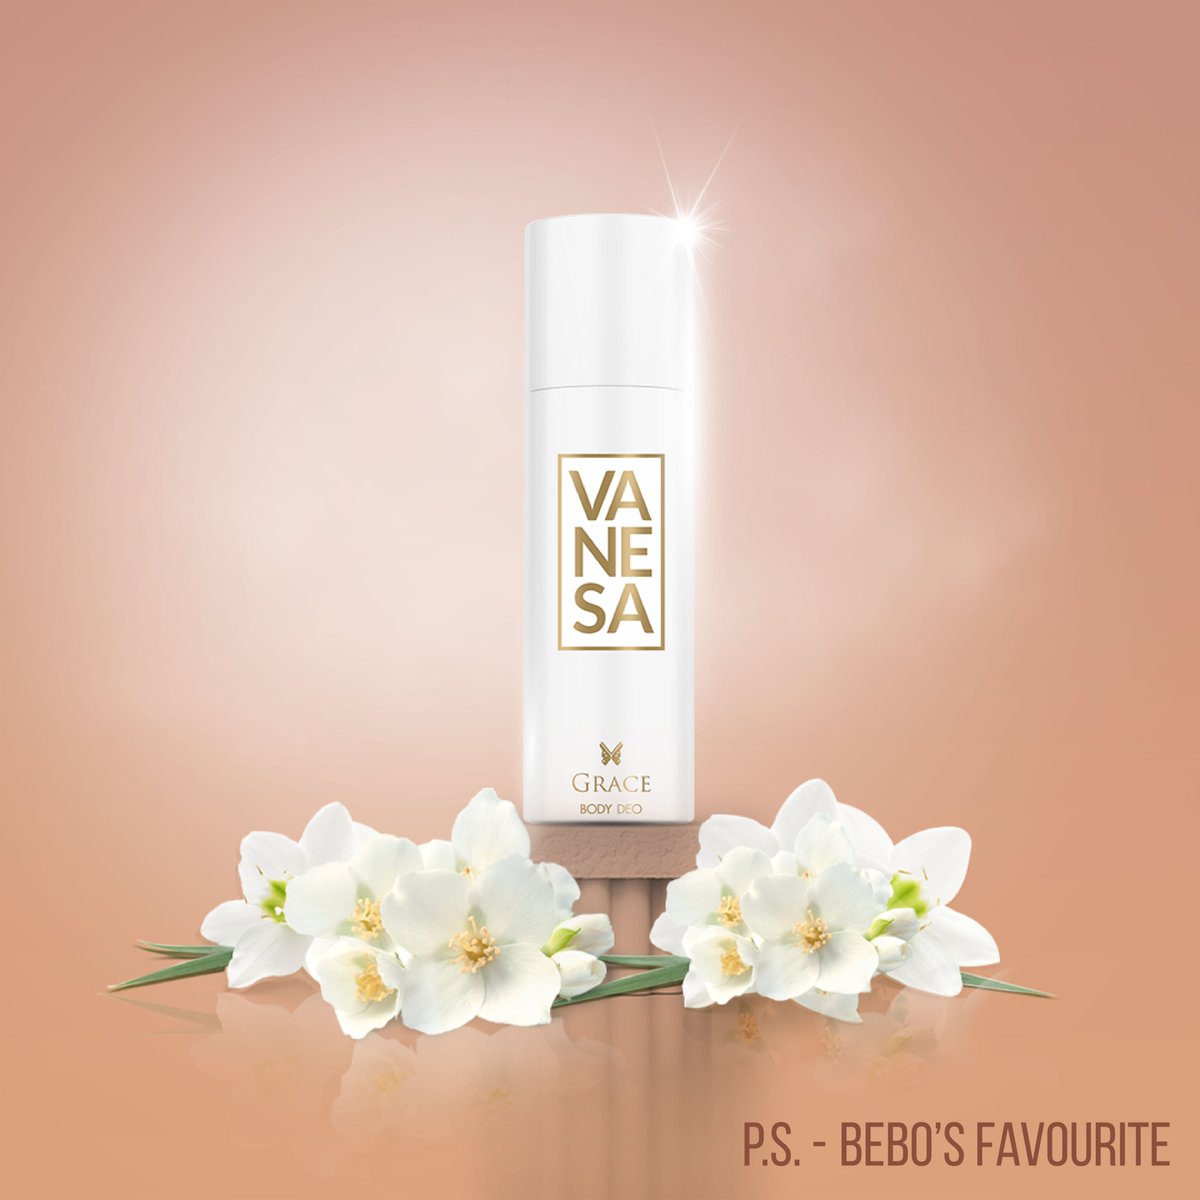 Inspired by the grace of Kareena Kapoor, Vanesa presents 'Grace' – a fragrance that captures the essence of timeless elegance. Experience the sophistication and charm of Kareena as you wear this exquisite scent. Grace yourself with Grace. #vanesabeauty #Vanesa #Grace #Perfume